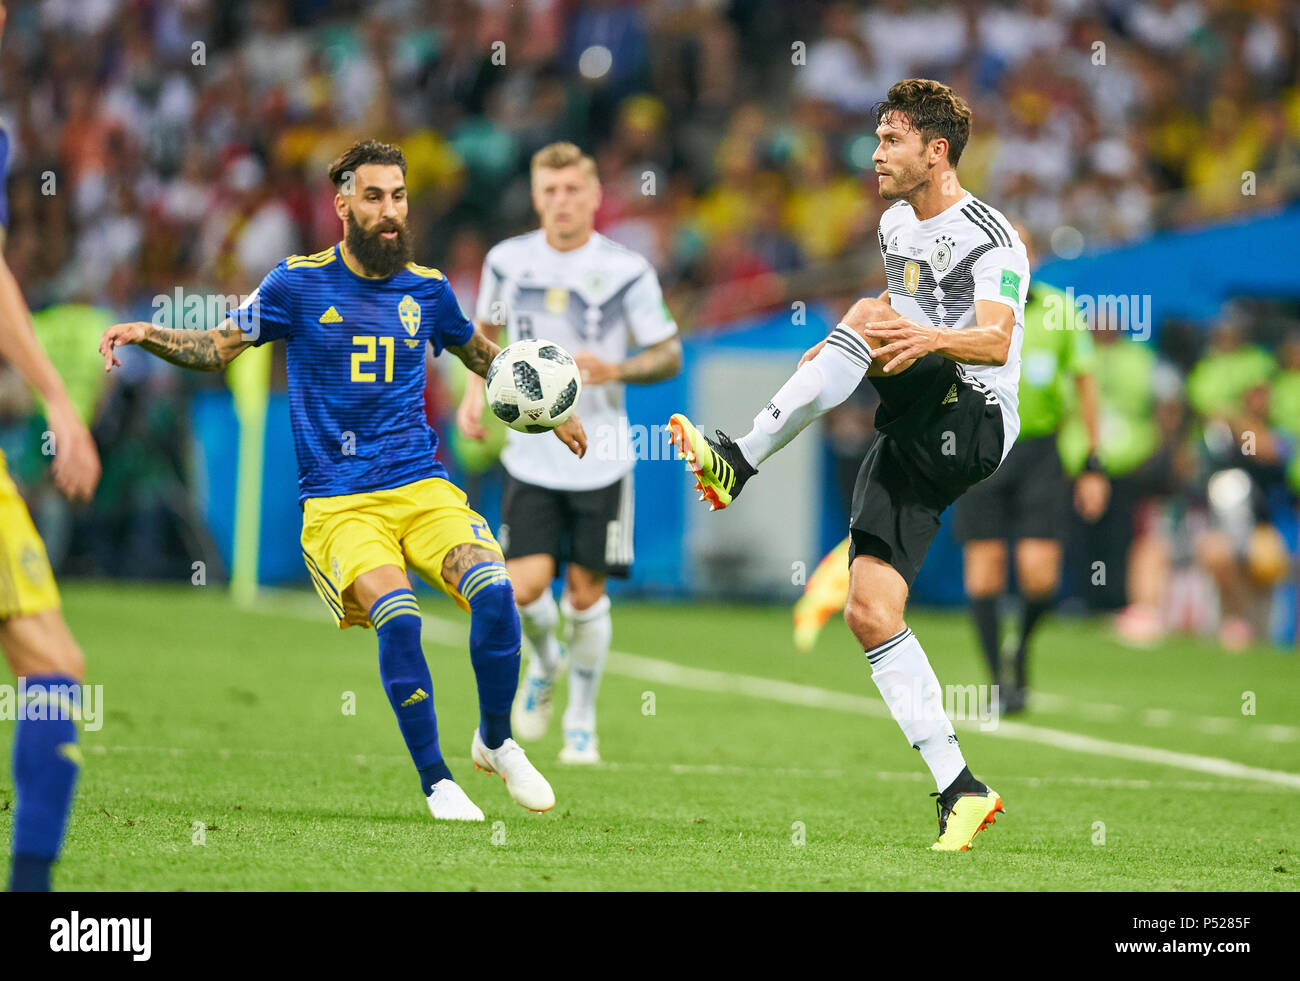 Germany - Sweden, Soccer, Sochi, June 23, 2018 Jonas HECTOR, DFB 3  compete for the ball, tackling, duel, header against Jimmy DURMAZ, SWE 21  GERMANY - SWEDEN 2-1 FIFA WORLD CUP 2018 RUSSIA, Group F, Season 2018/2019,  June 23, 2018  Fisht Olympic Stadium in Sotchi, Russia.  © Peter Schatz / Alamy Live News Stock Photo